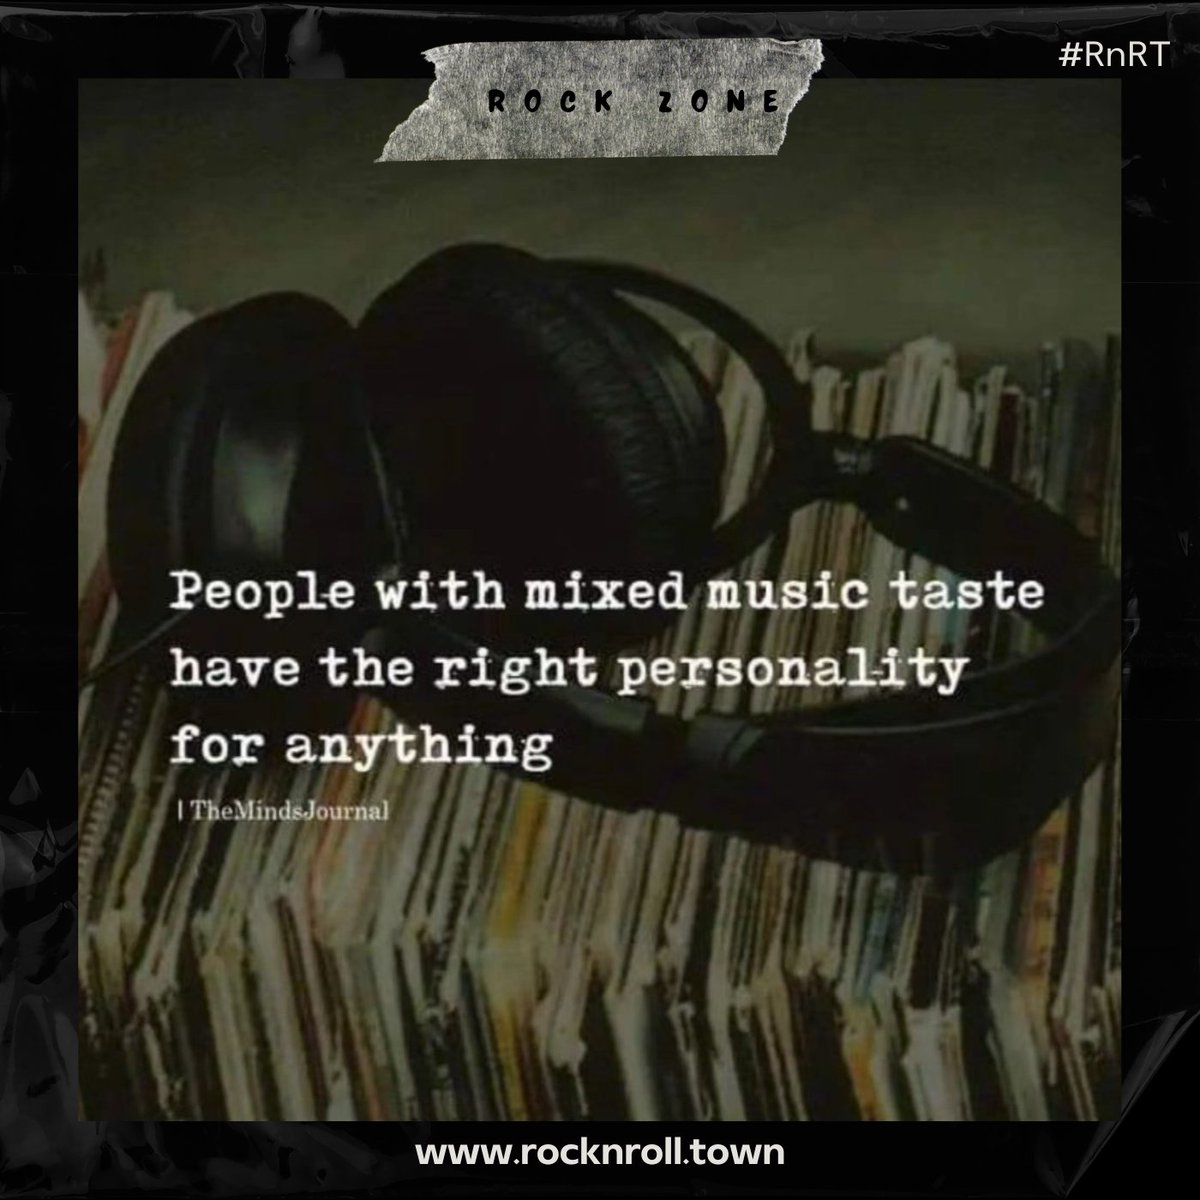 🤘🏻 #RockZone 🤘🏻

People with mixed music taste have the right personality for anything

#RnRT #RockNRollTown #Towners #RockNRollQuotes #RockQuotes #MetalQuotes #MusicQuotes #Rock #Metal #RockMusic #MetalMusic #Music #RockSiteGreece #MetalSiteGreece #RockSite #MetalSite